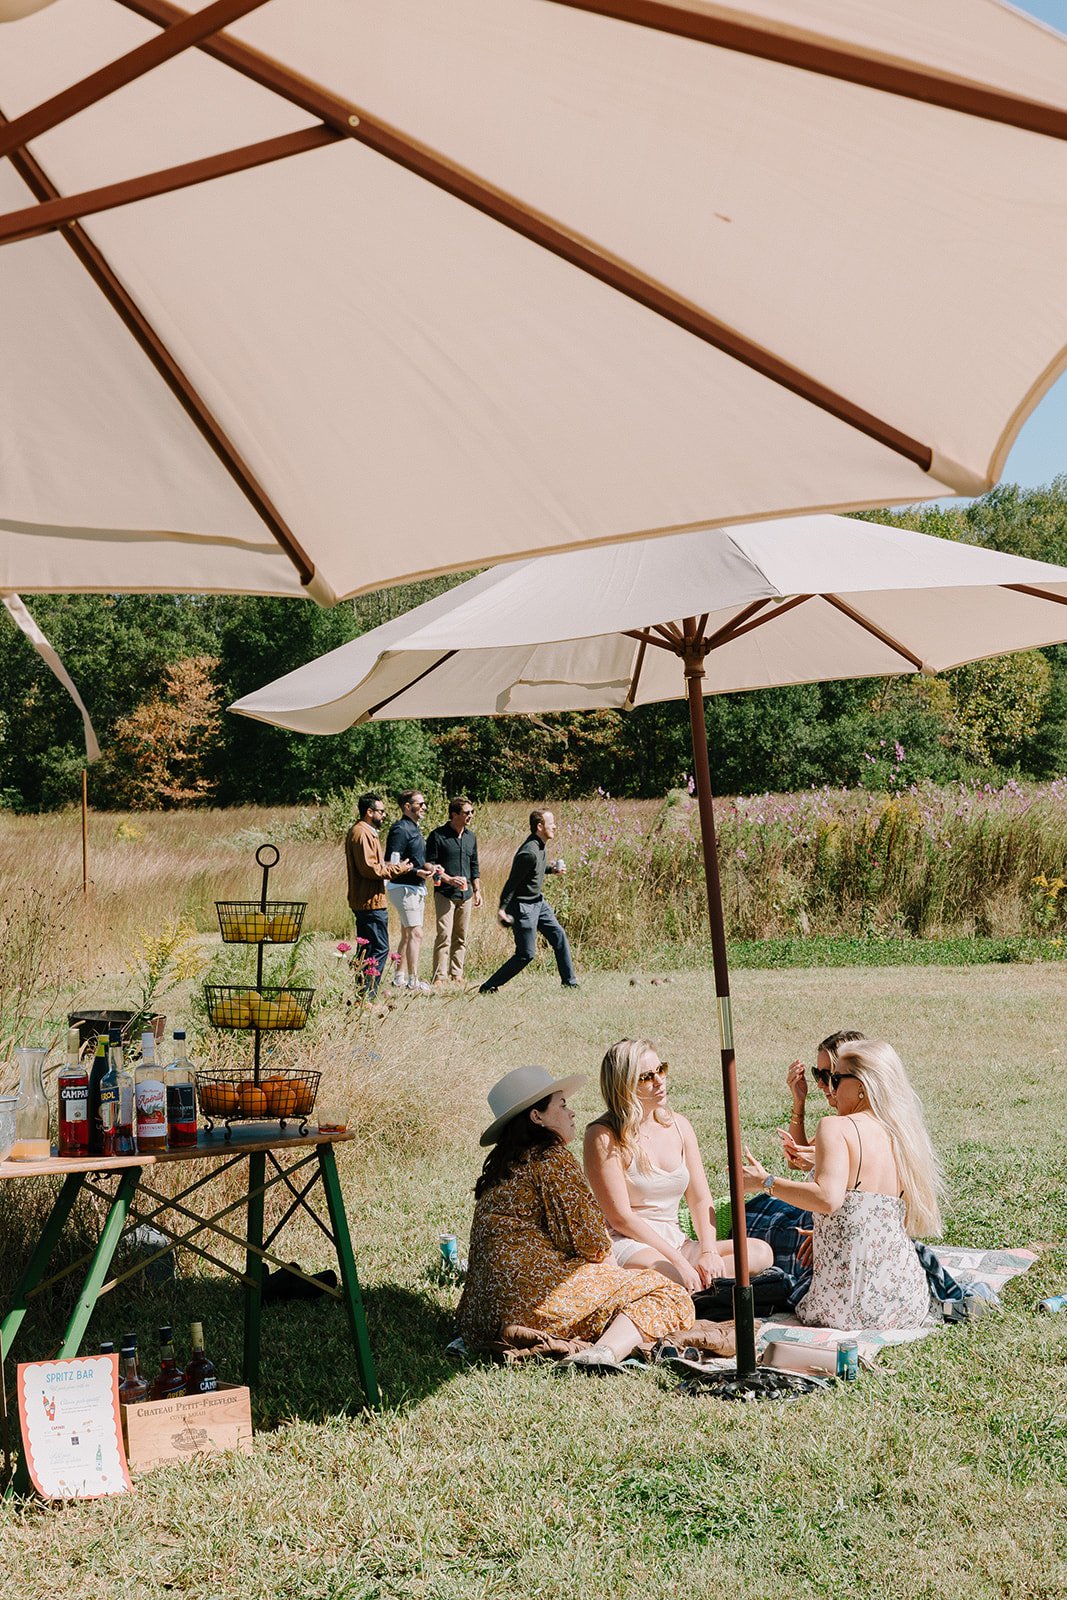 An Intimate Wedding in Tn at Mable & Jack Farmstead - Welcome Picnic - Destination Wedding Photographer (13).jpg